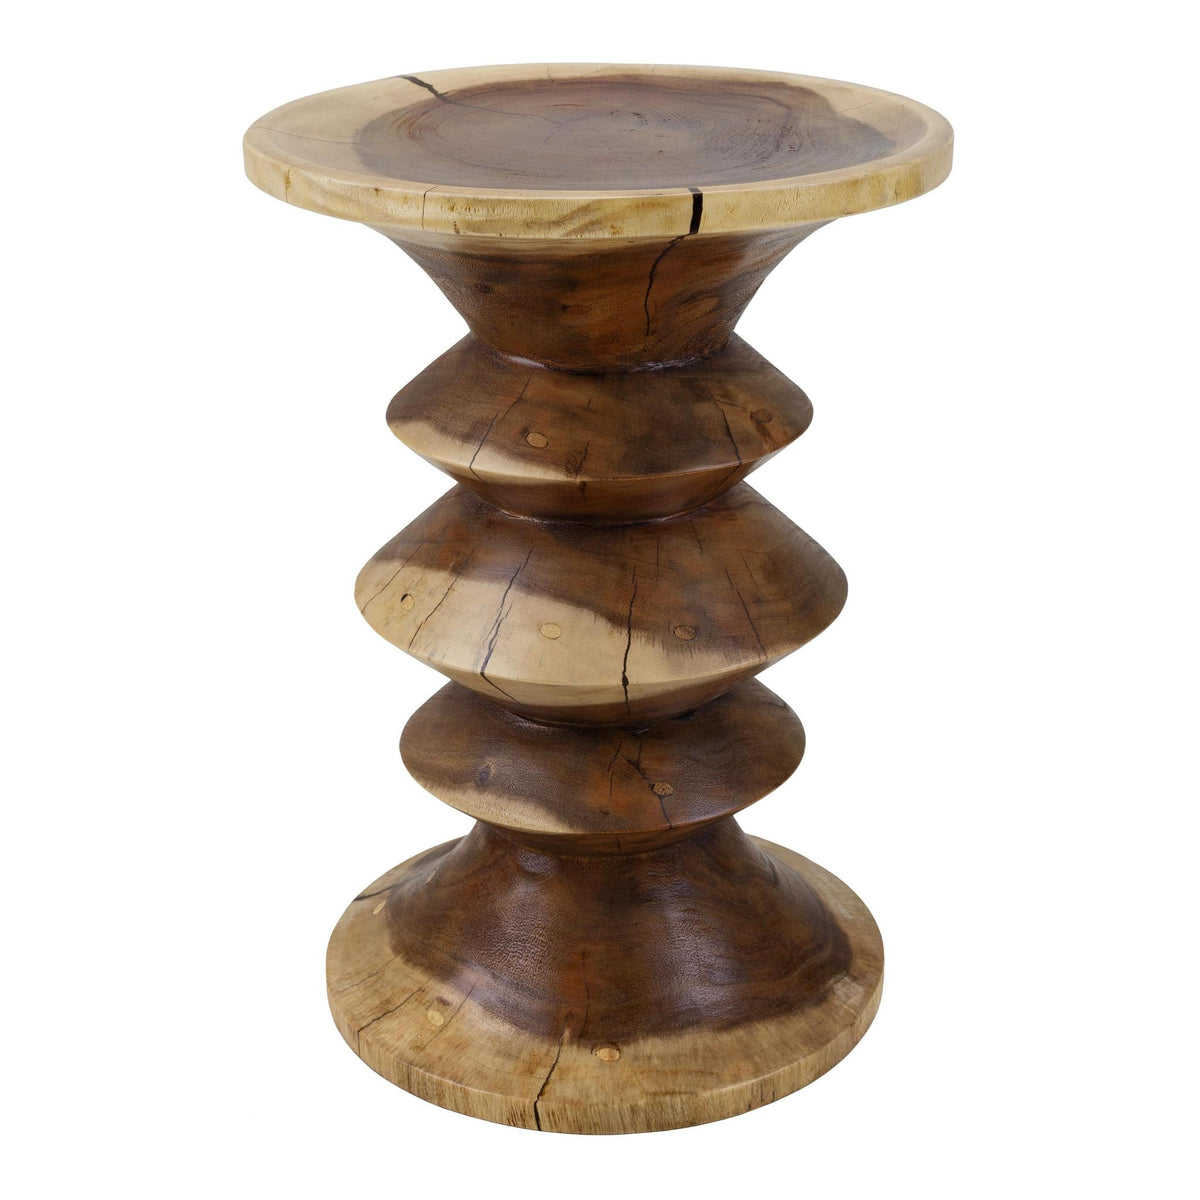 Ziva Trembesi Side/ End Table by New Pacific Direct - 1210026